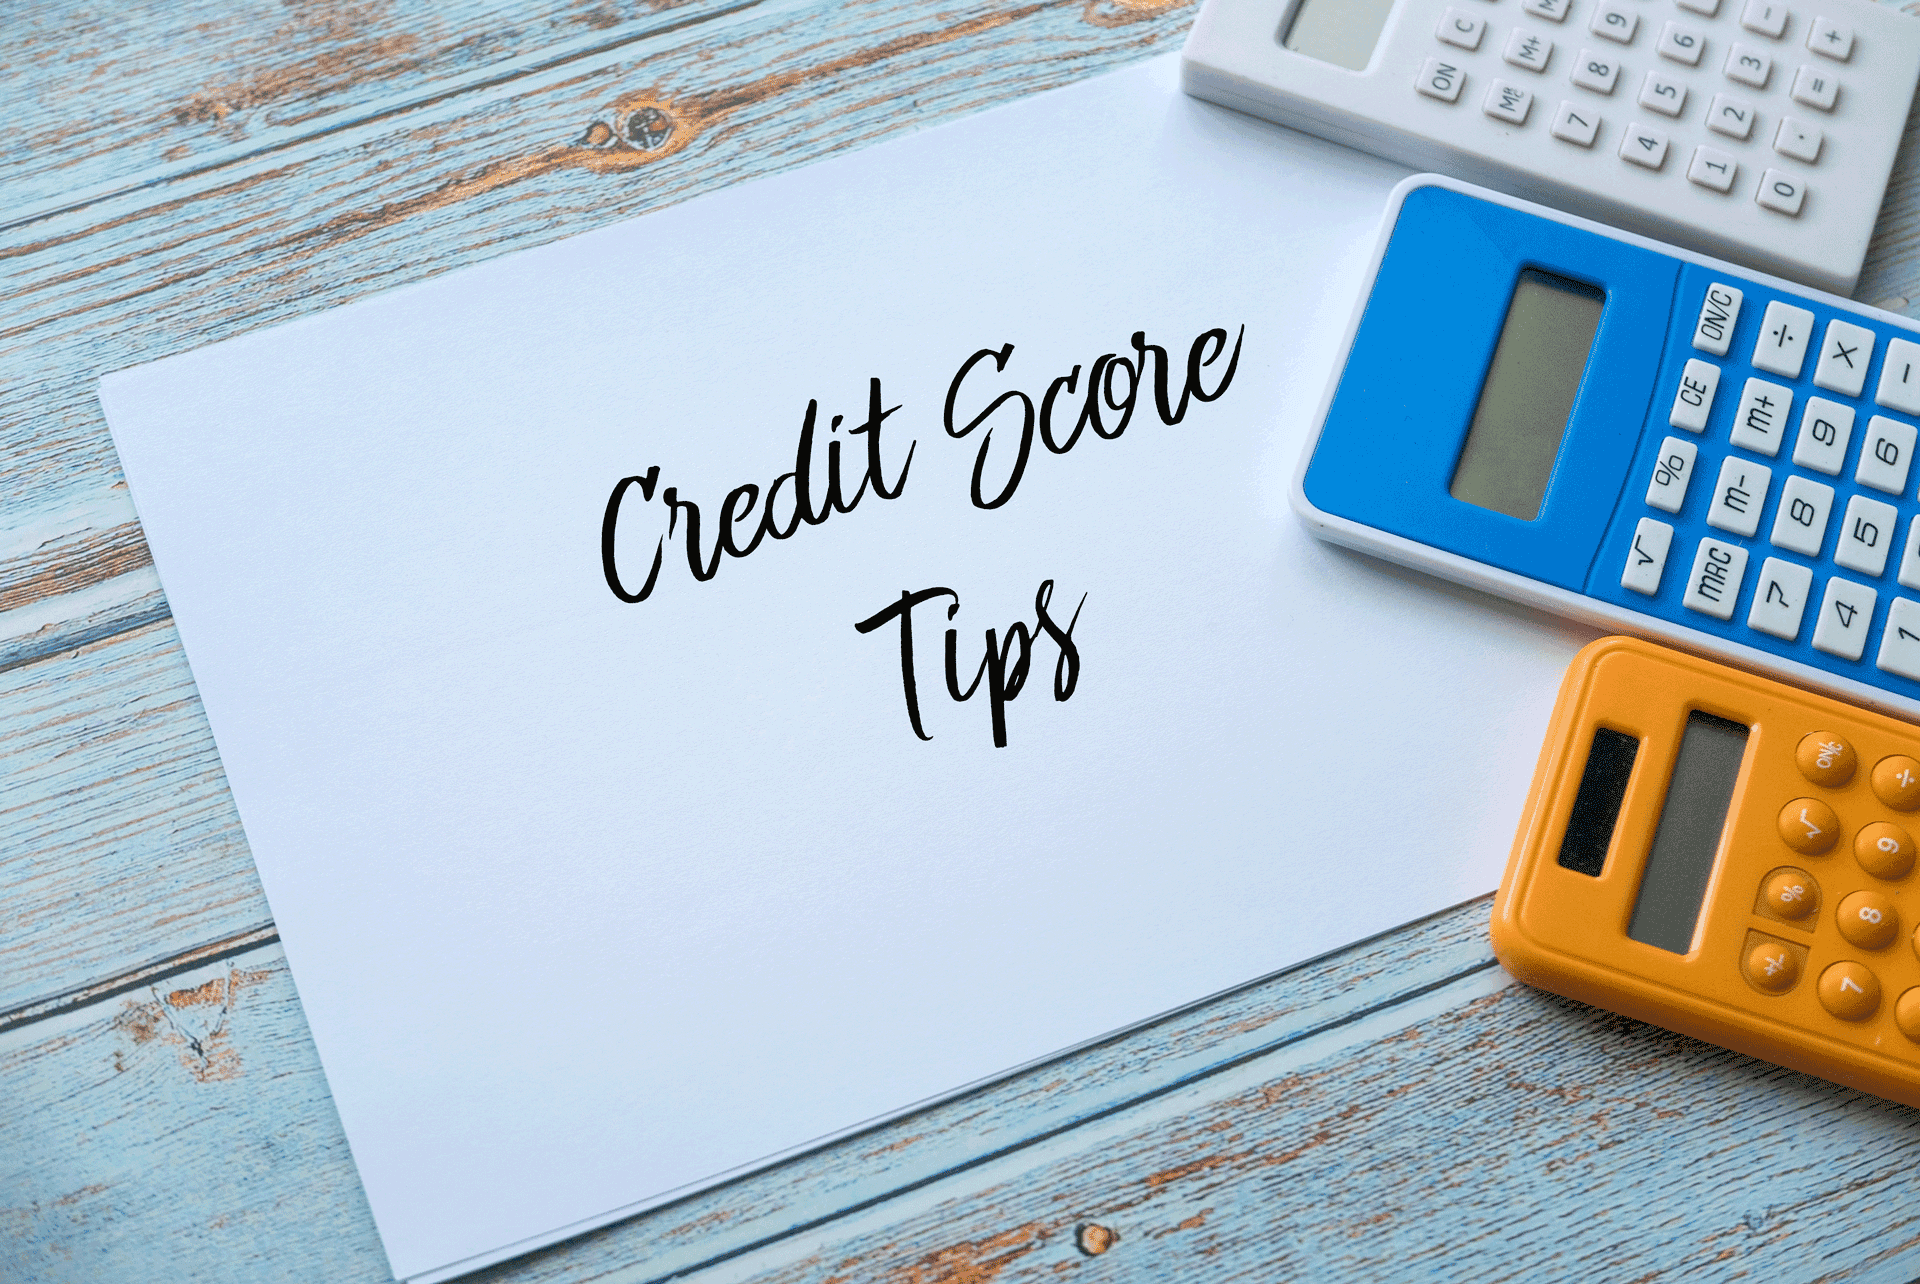 Need a Loan ASAP? 9 Tips to Raise Your Credit Score to Get Approved